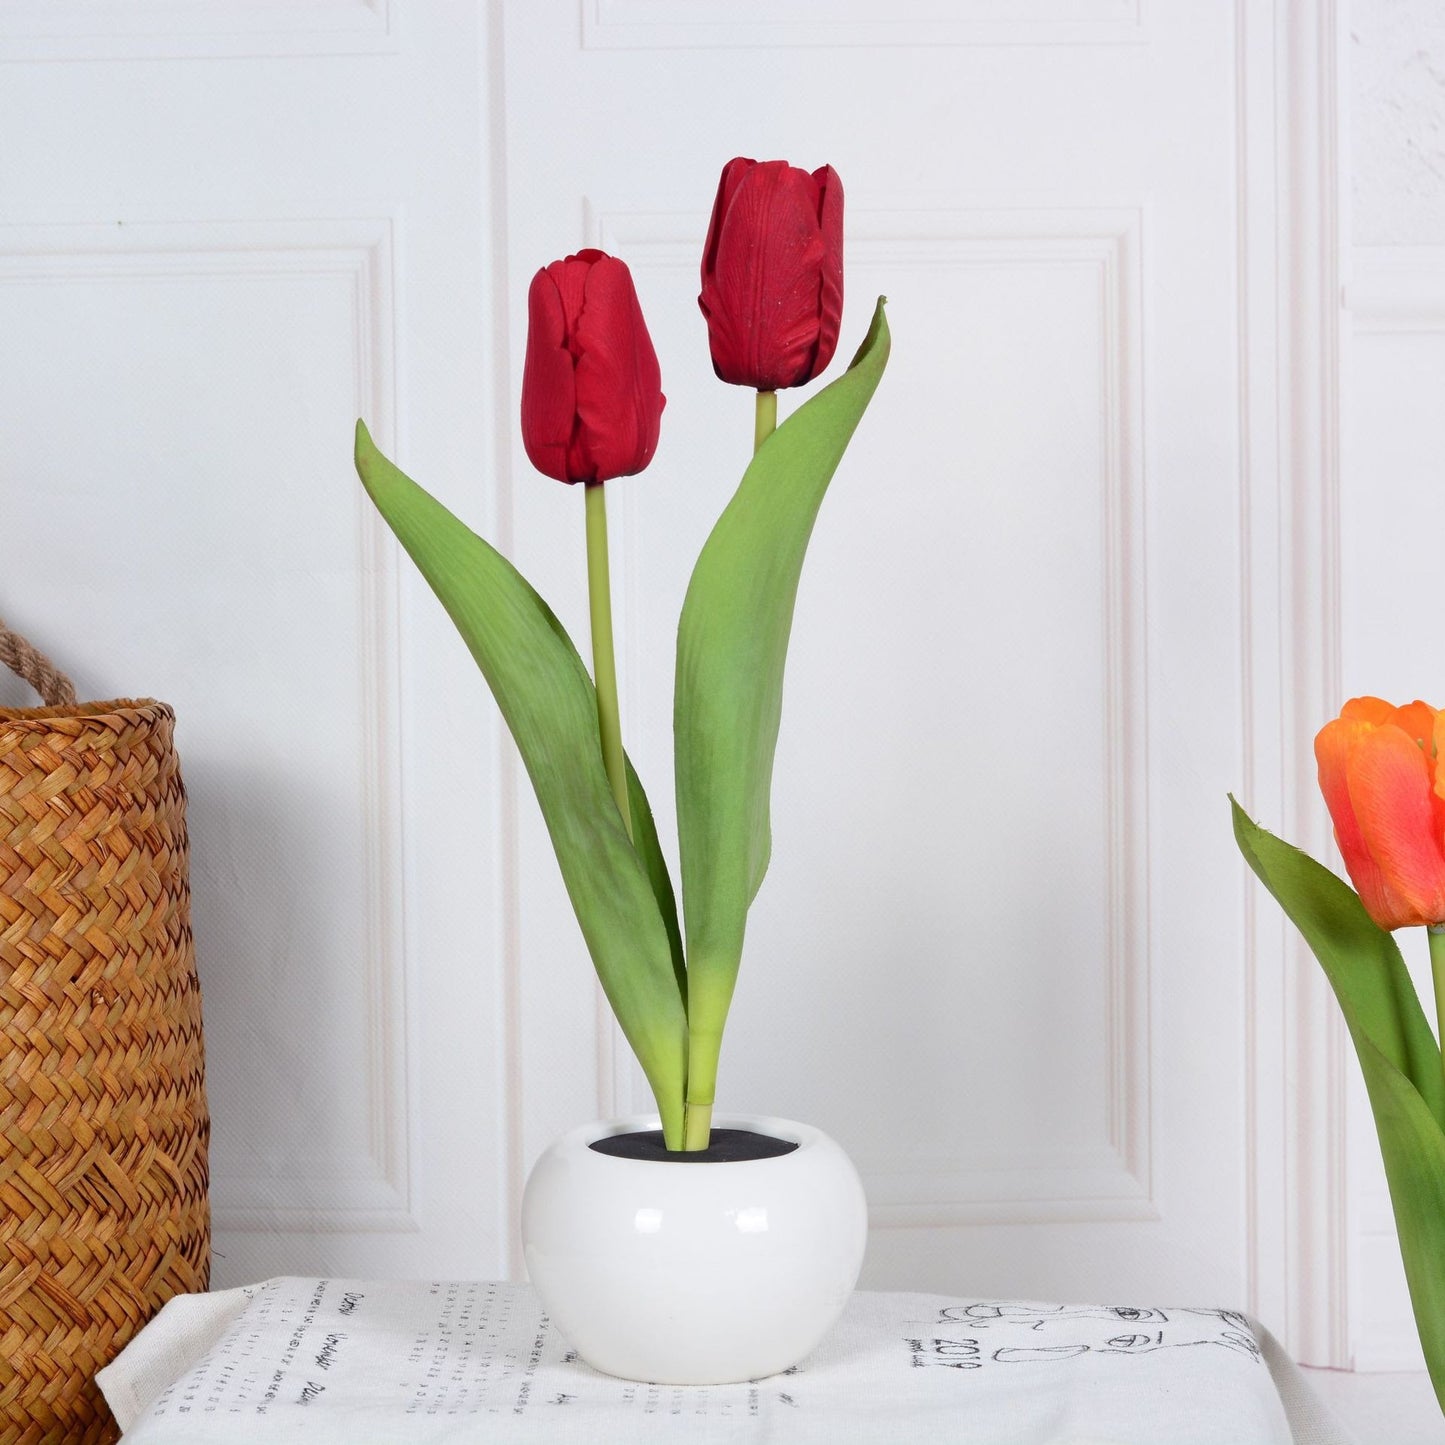 LED Tulip Flower Night Light Artificial Flowerpot Potted Plant